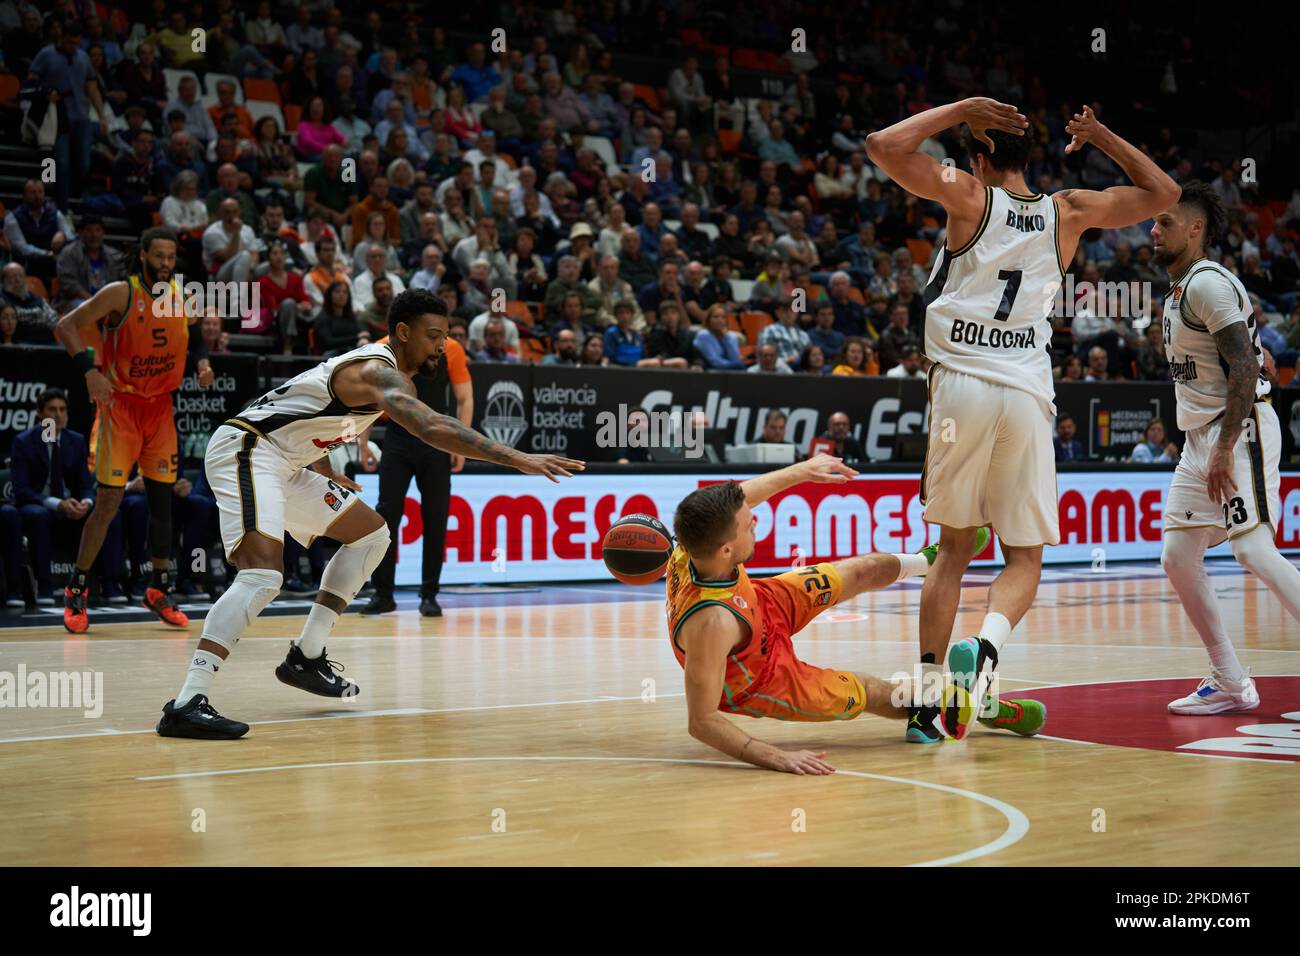 Martin Hermannsson of Valencia basket (L) and Ismael Bako of Virtus Segafredo Bologna Roster (R) in action during the Turkish Airlines EuroLeague Regular Season Round 33 at Fuente de San Luis Sport Hall.Valencia Basket 79:68 Virtus Segafredo Bologna Roster (Photo by Vicente Vidal Fernandez / SOPA Images/Sipa USA) Stock Photo